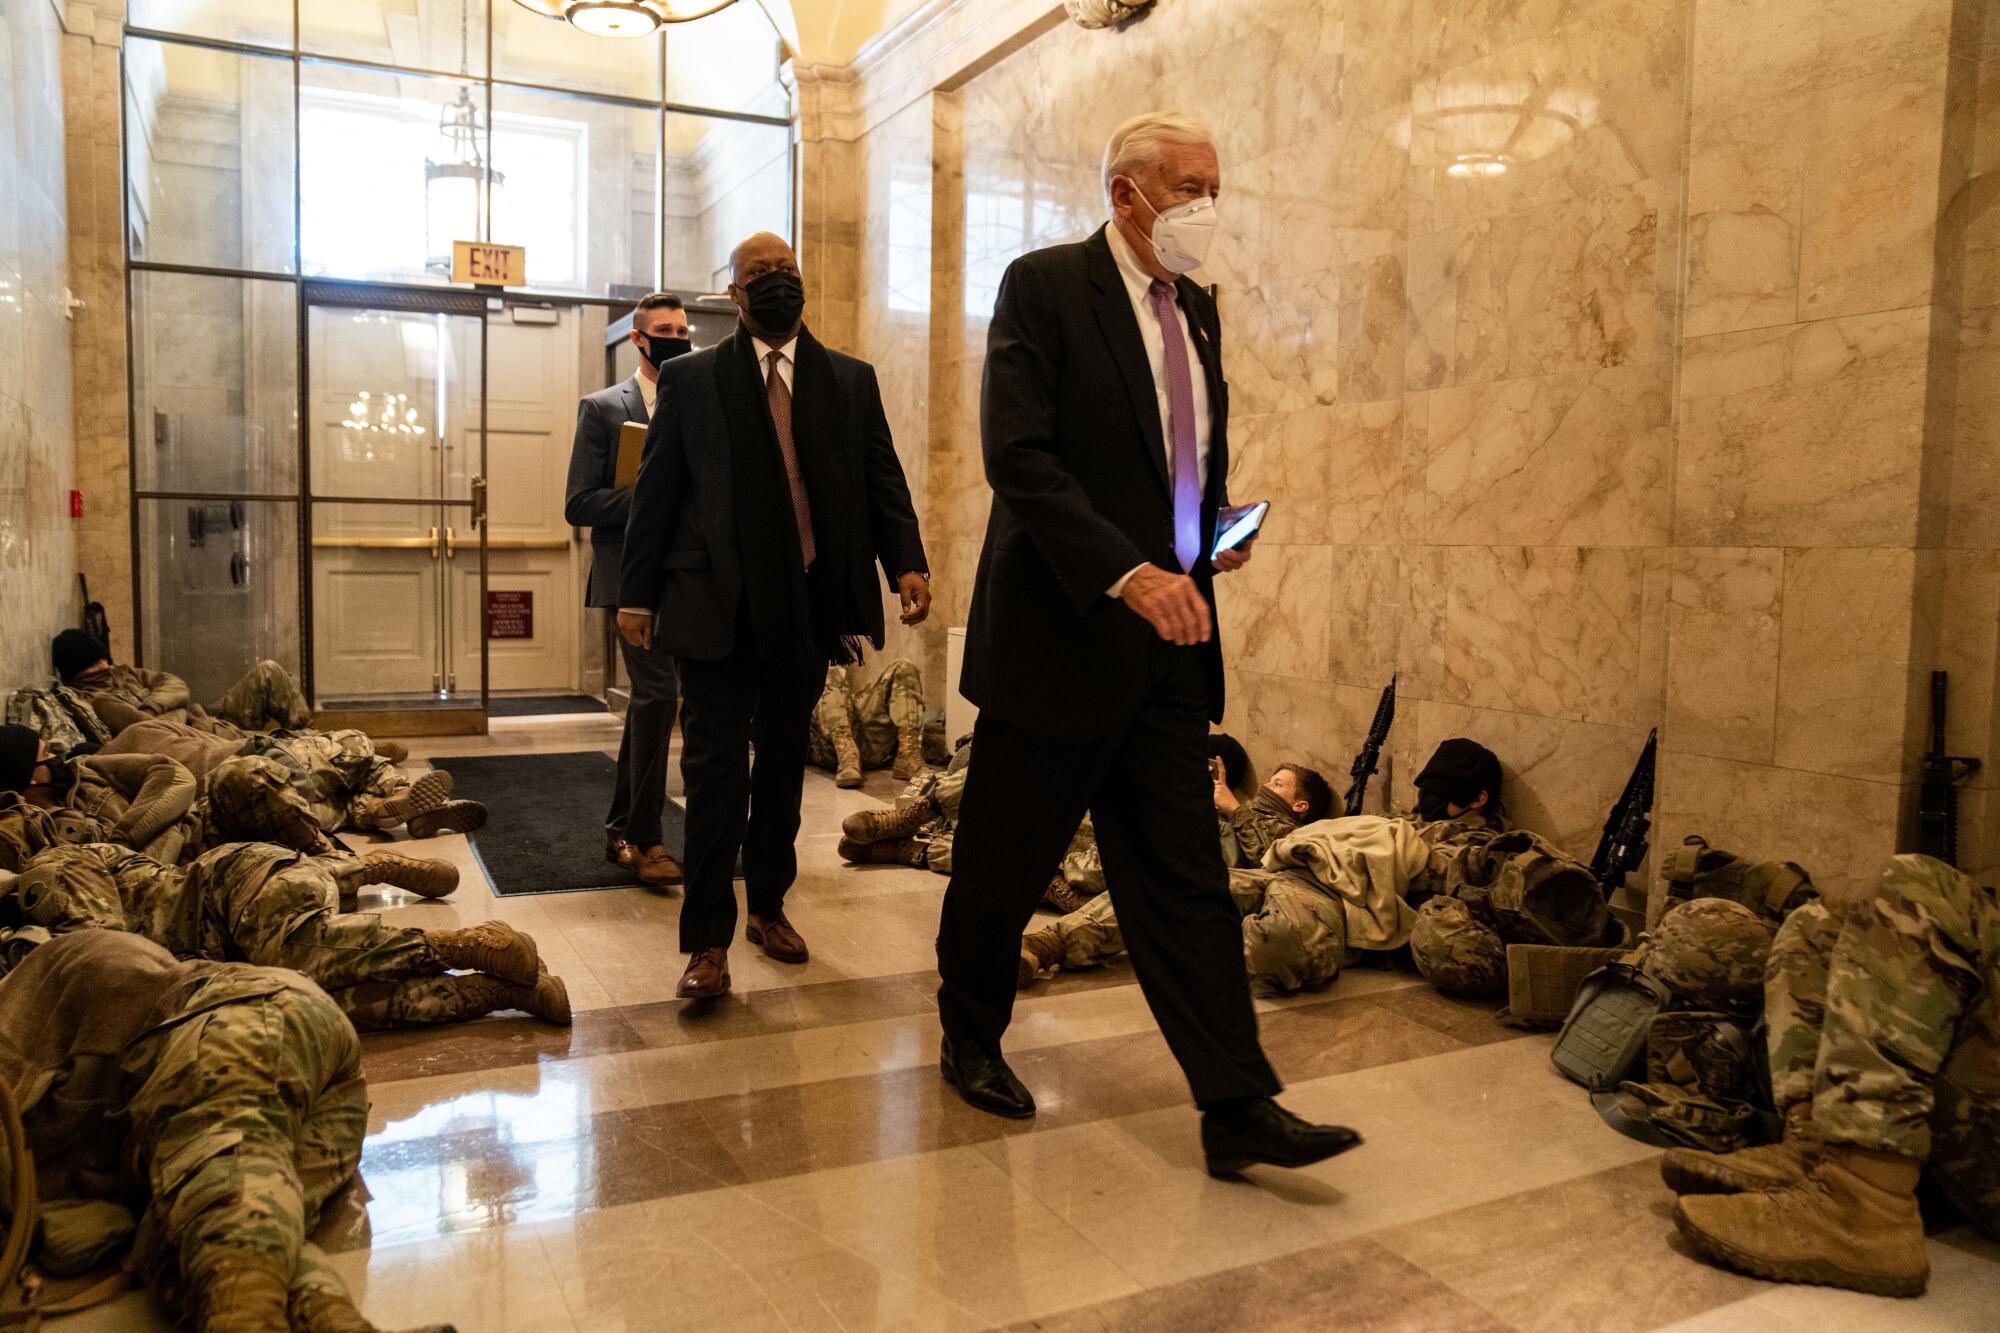 House Majority Leader Steny H. Hoyer (D-Md.) and others pass National Guard troops at rest in the U.S. Capitol.